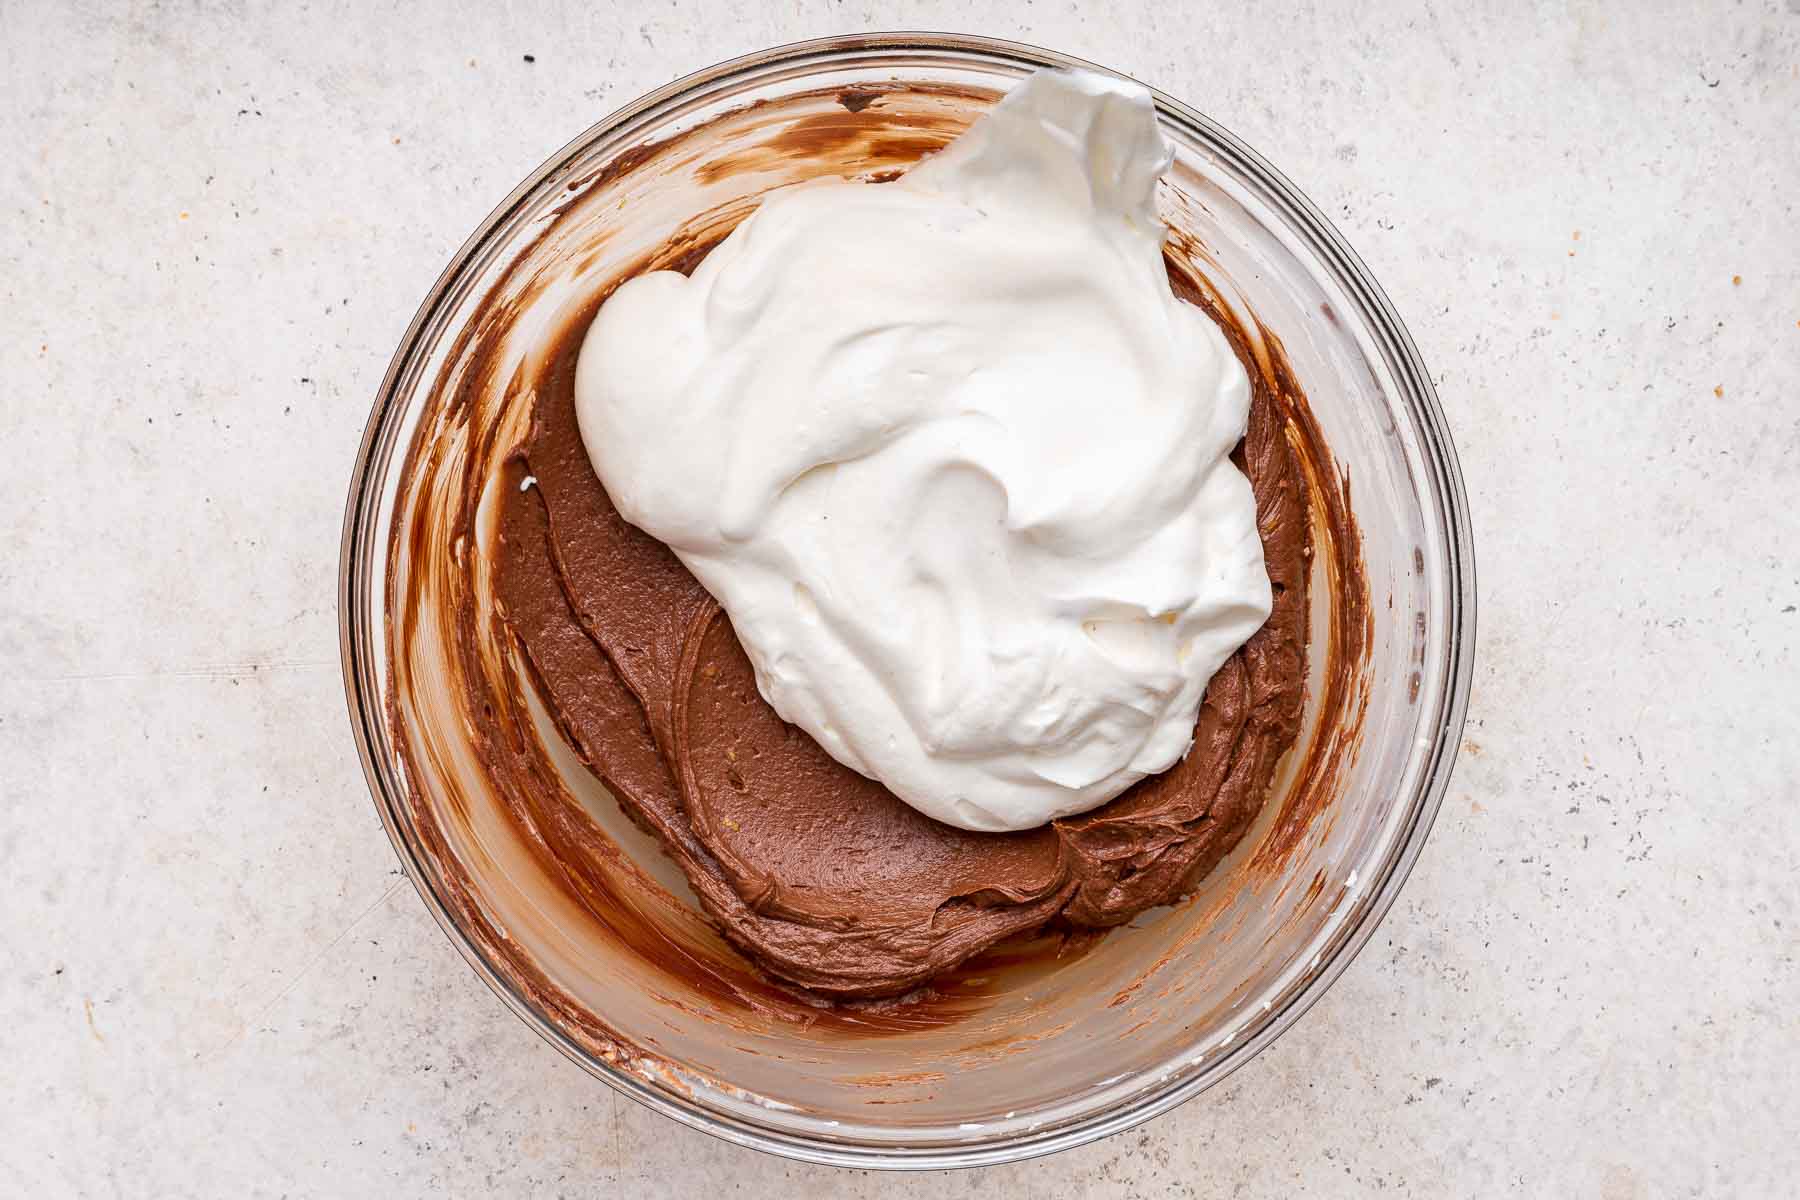 Folding white whipped cream into brown chocolate mixture in glass bowl.